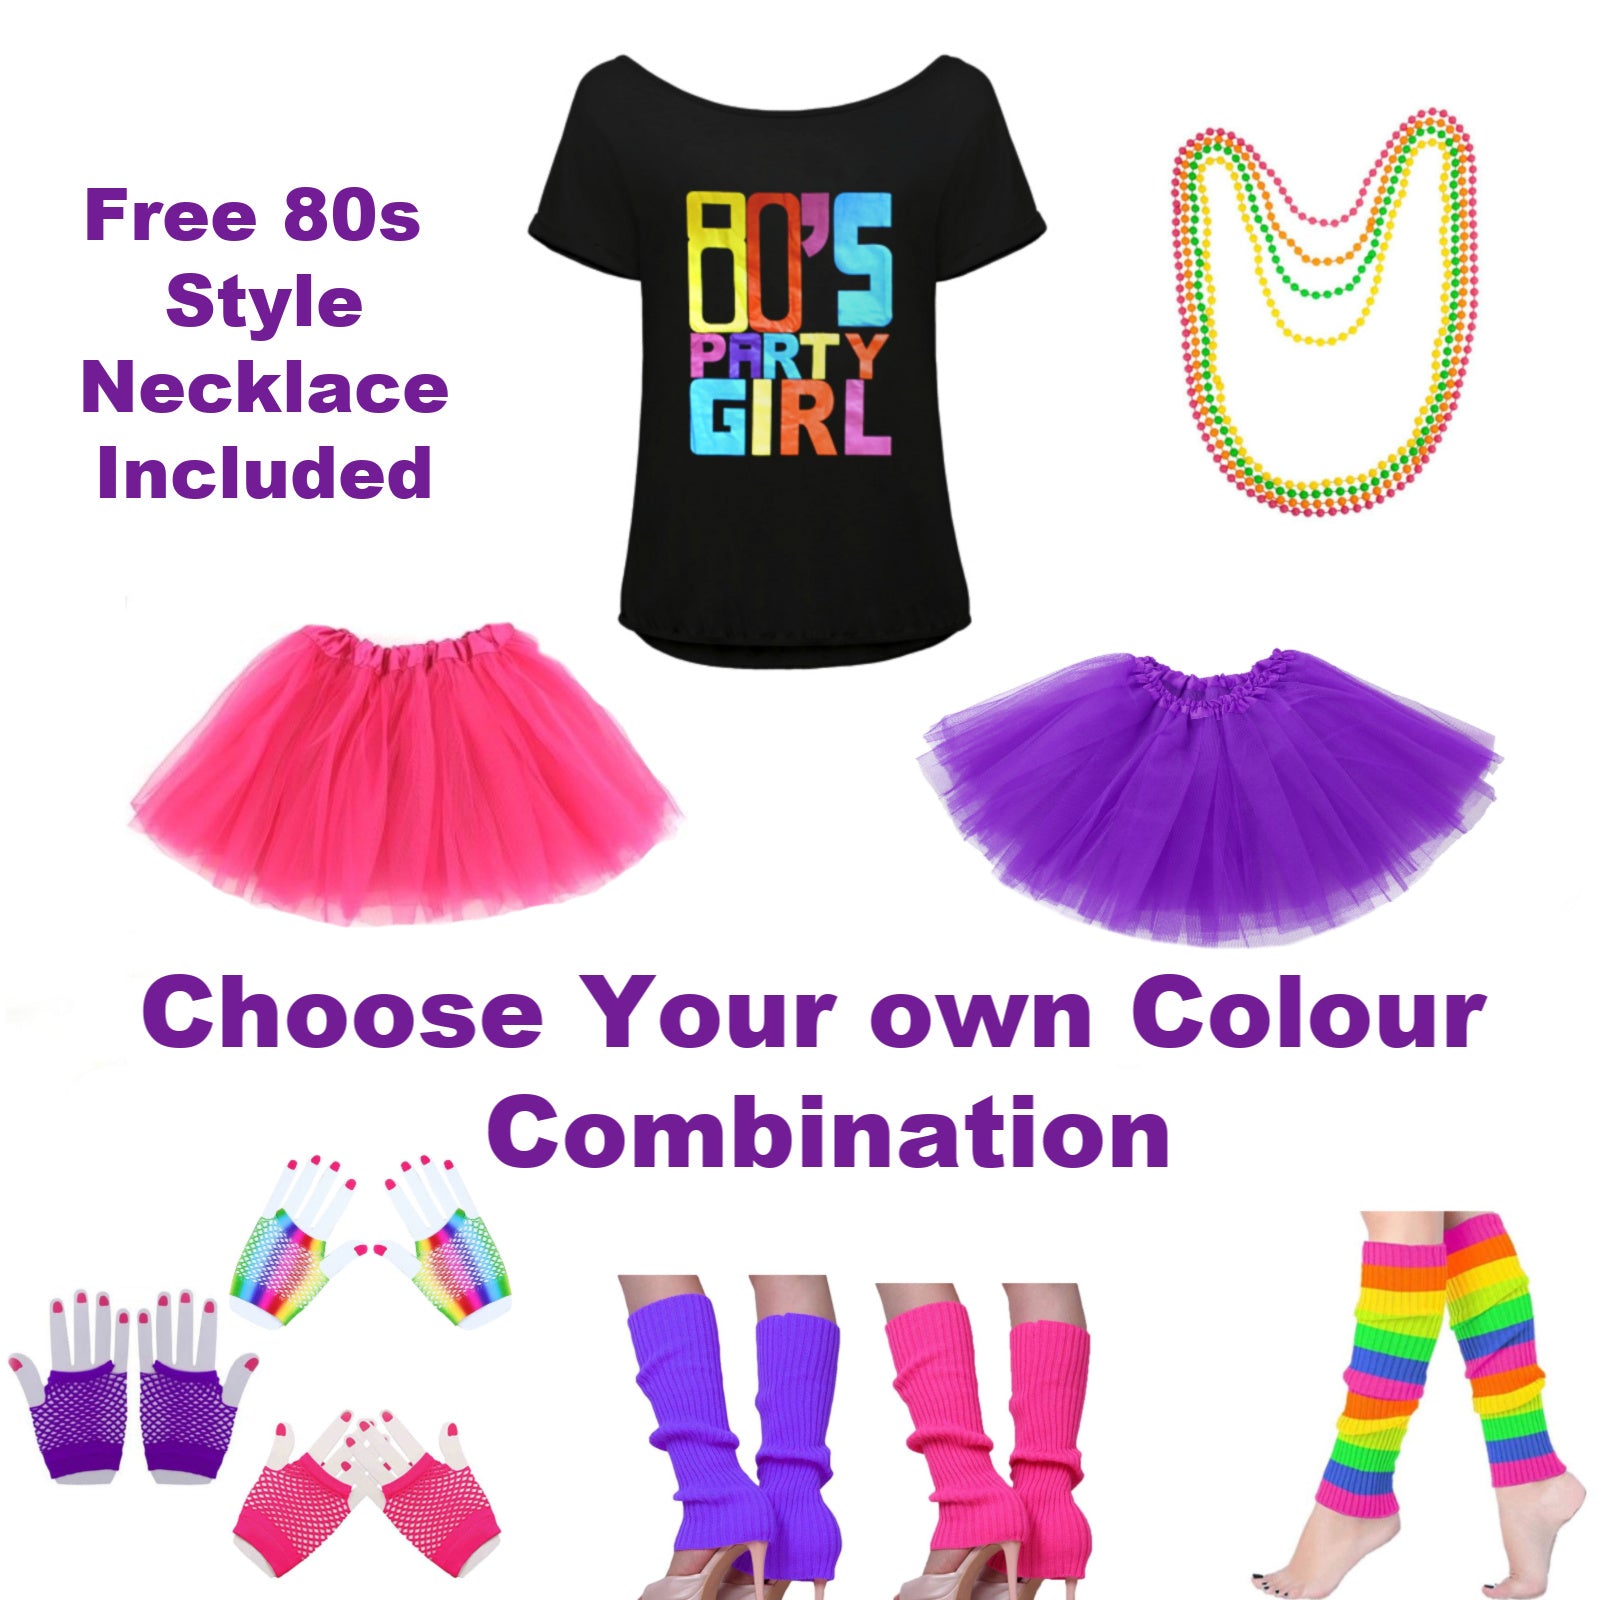 80s Womens Costume Ideas with 80s Party Girl Top - Party Ideaz